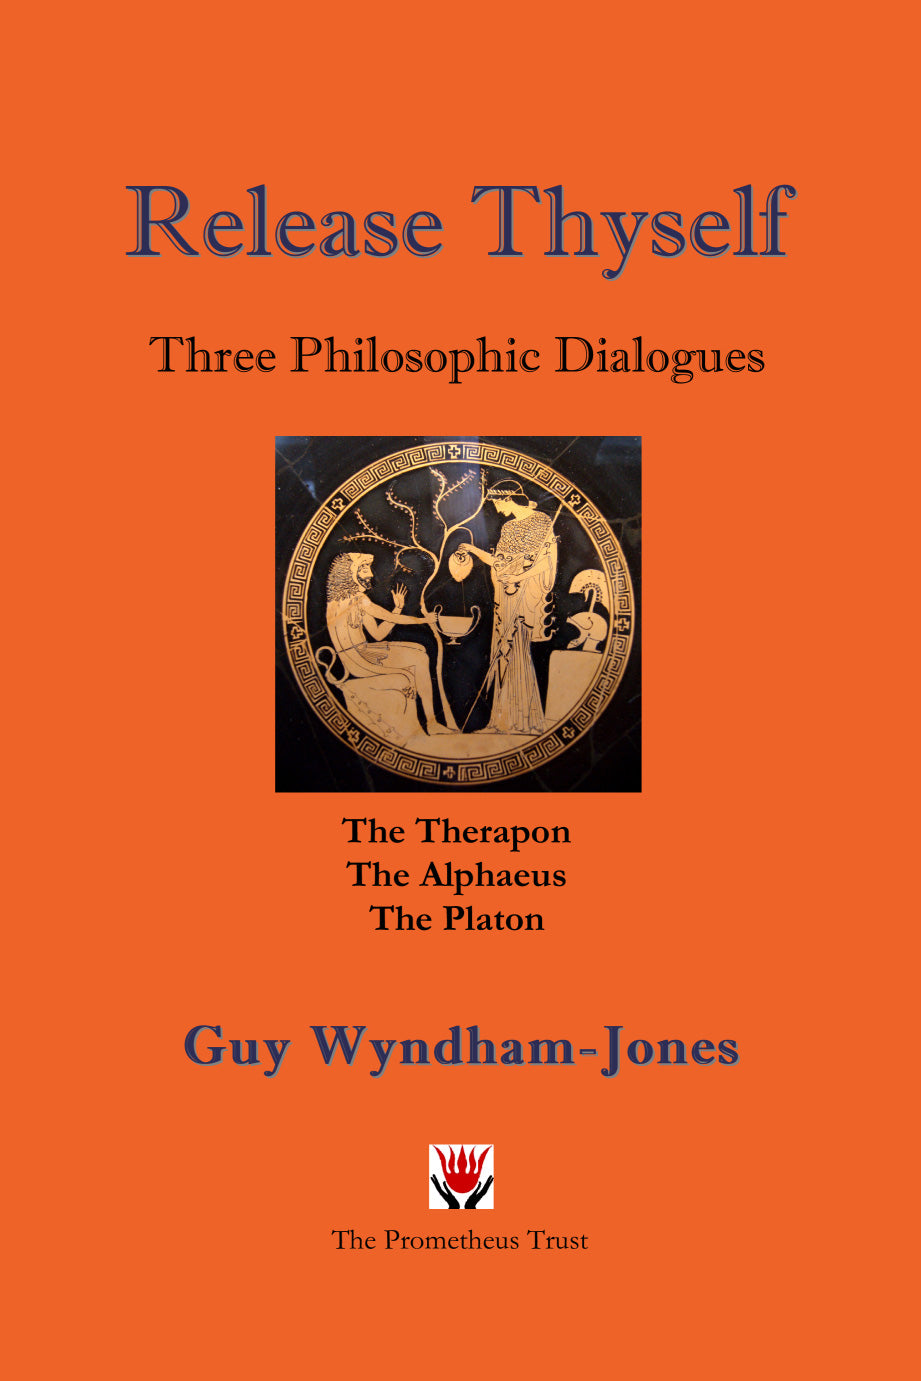 Release Thyself: Three Philosophic Dialogues